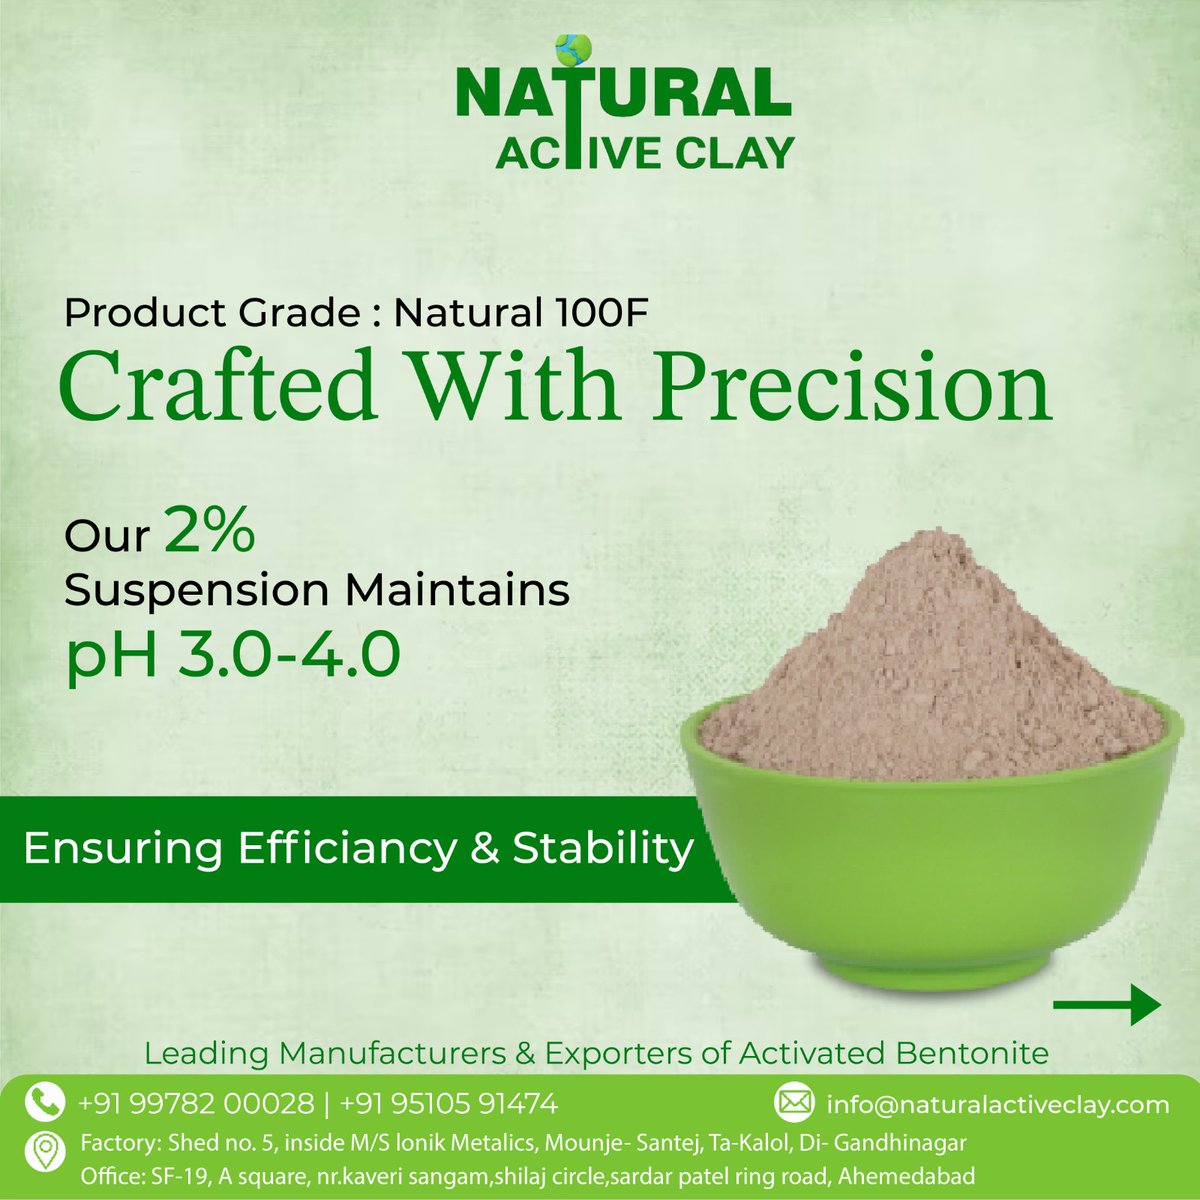 Experience nature's precision! Our 100F natural-grade product crafted with 2% suspension ensures pH 3.0-4.0 for ultimate efficiency and stability.
#NaturalProducts #PrecisionCrafting #EfficiencyGuaranteed #StableFormula #pHBalance #ProductQuality #NaturalIngredients